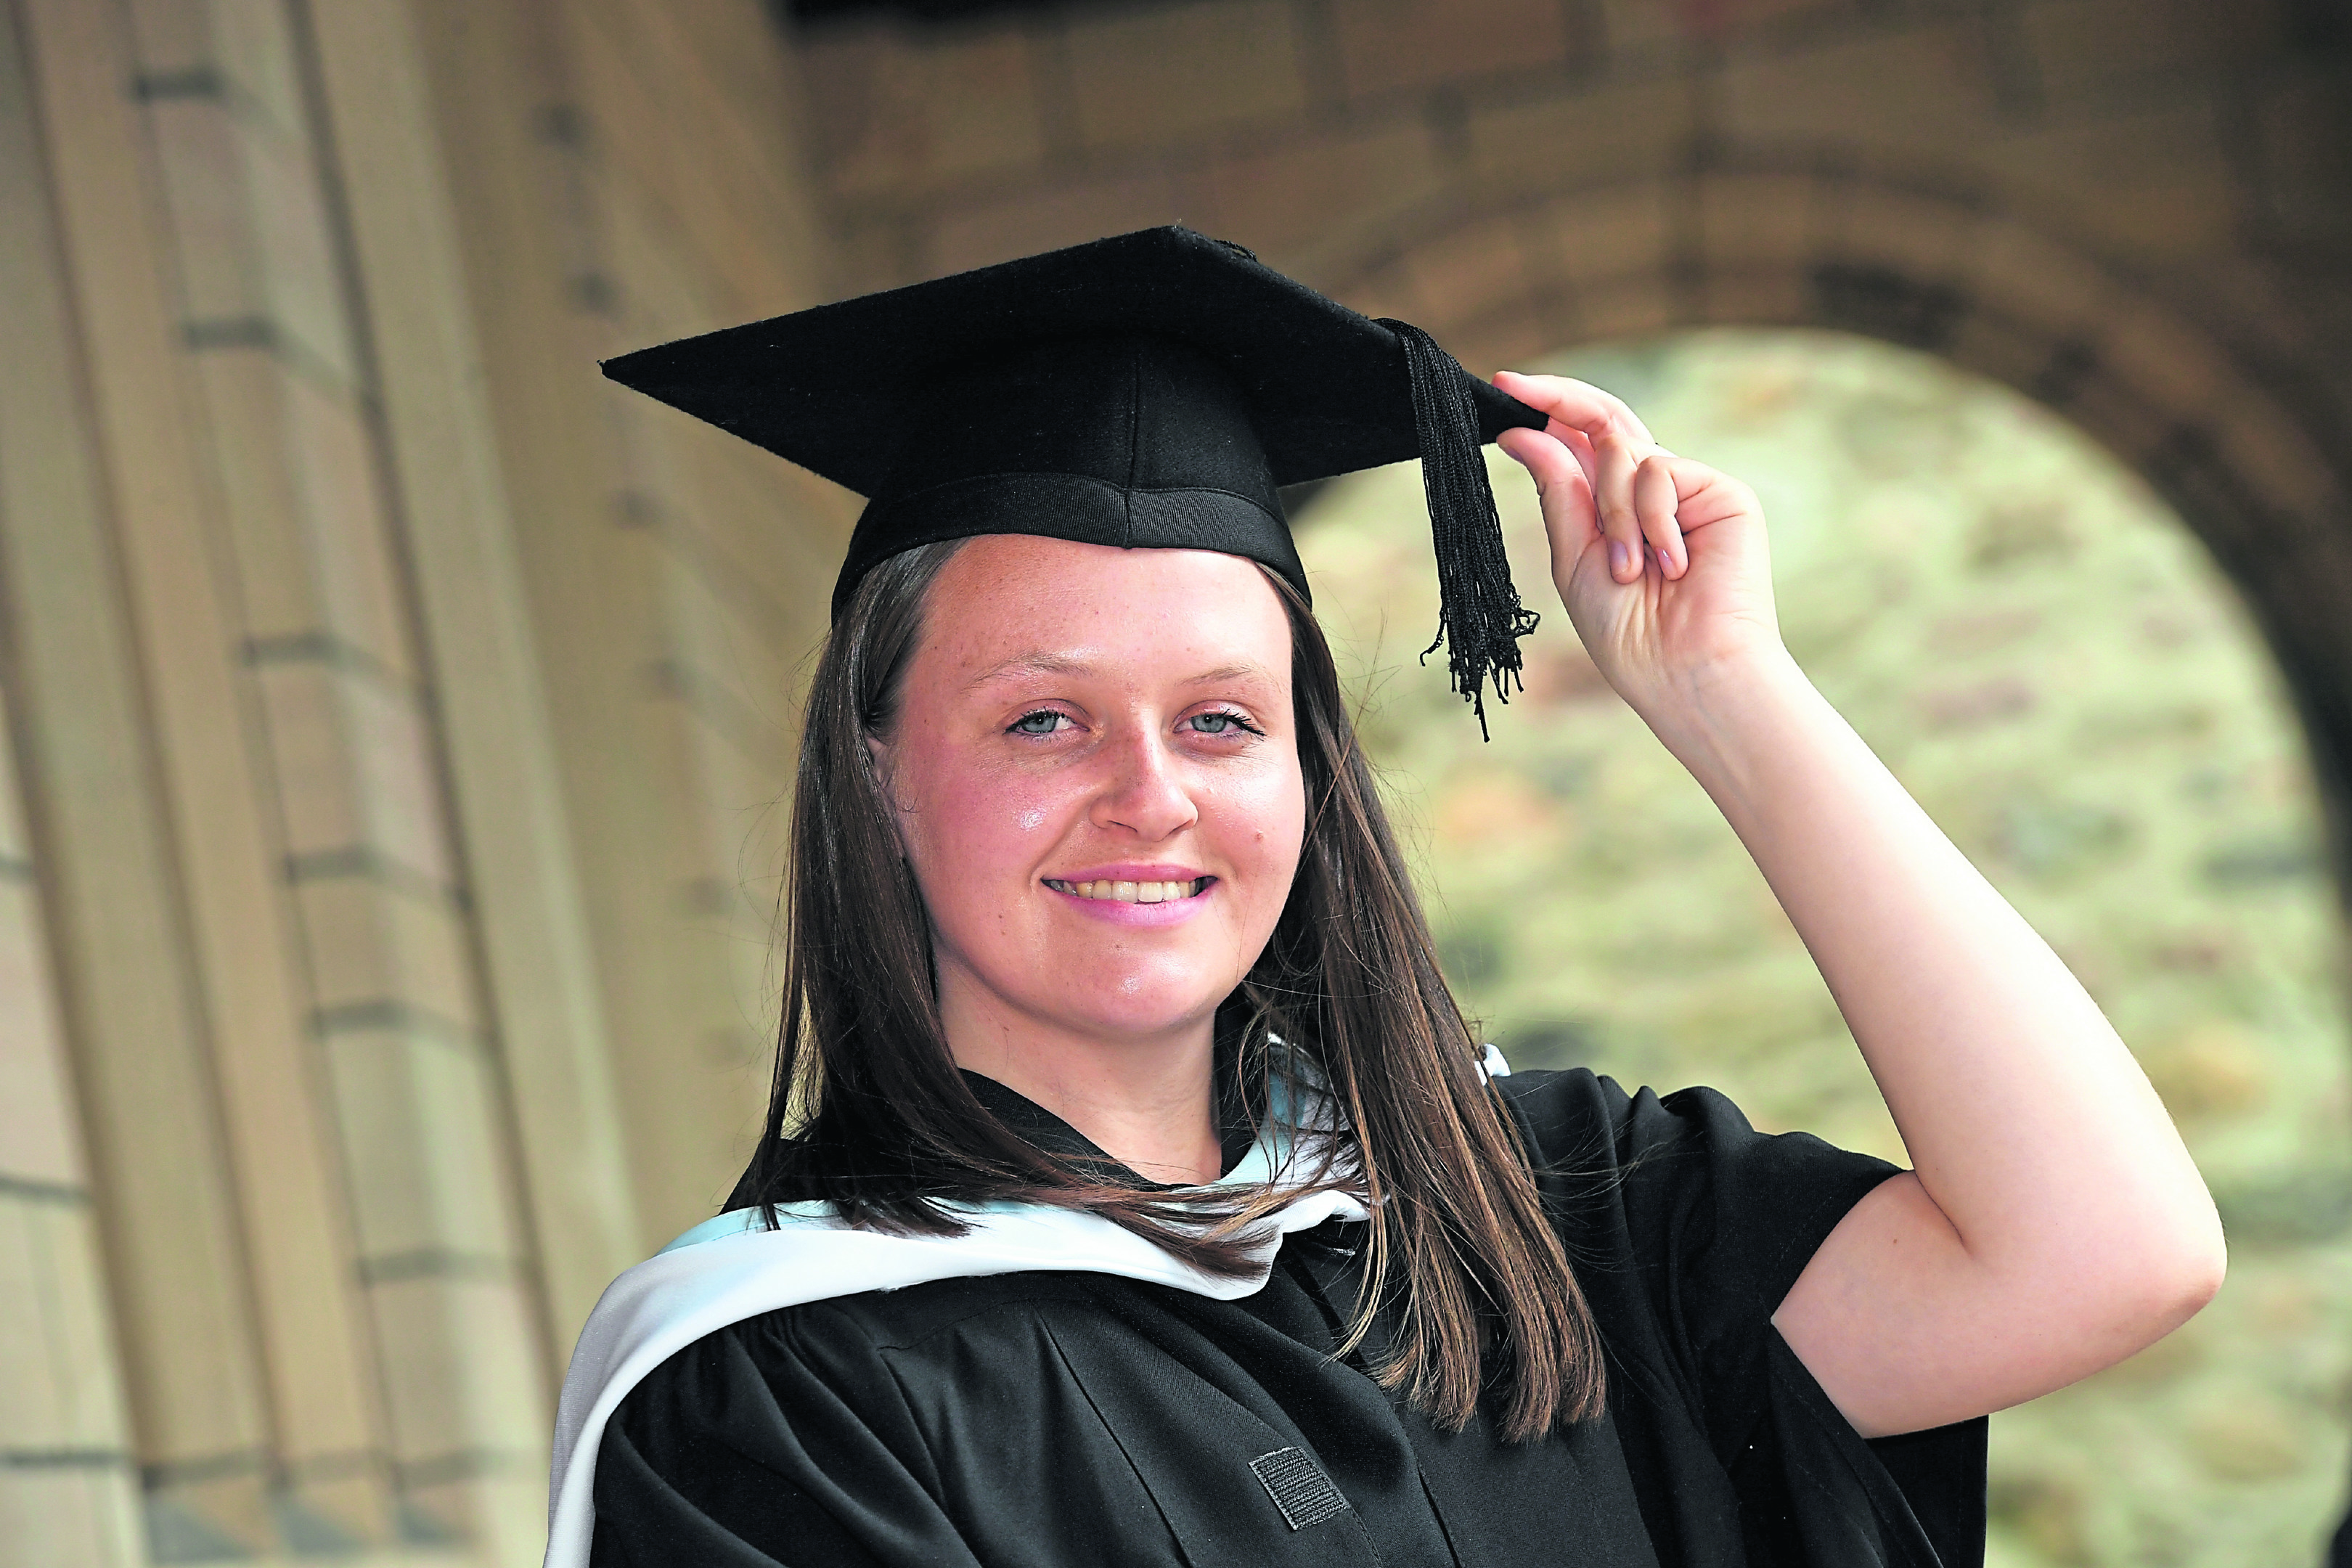 Ashleigh Buchan now has diploma in legal practice. Photograph by Kami Thomson